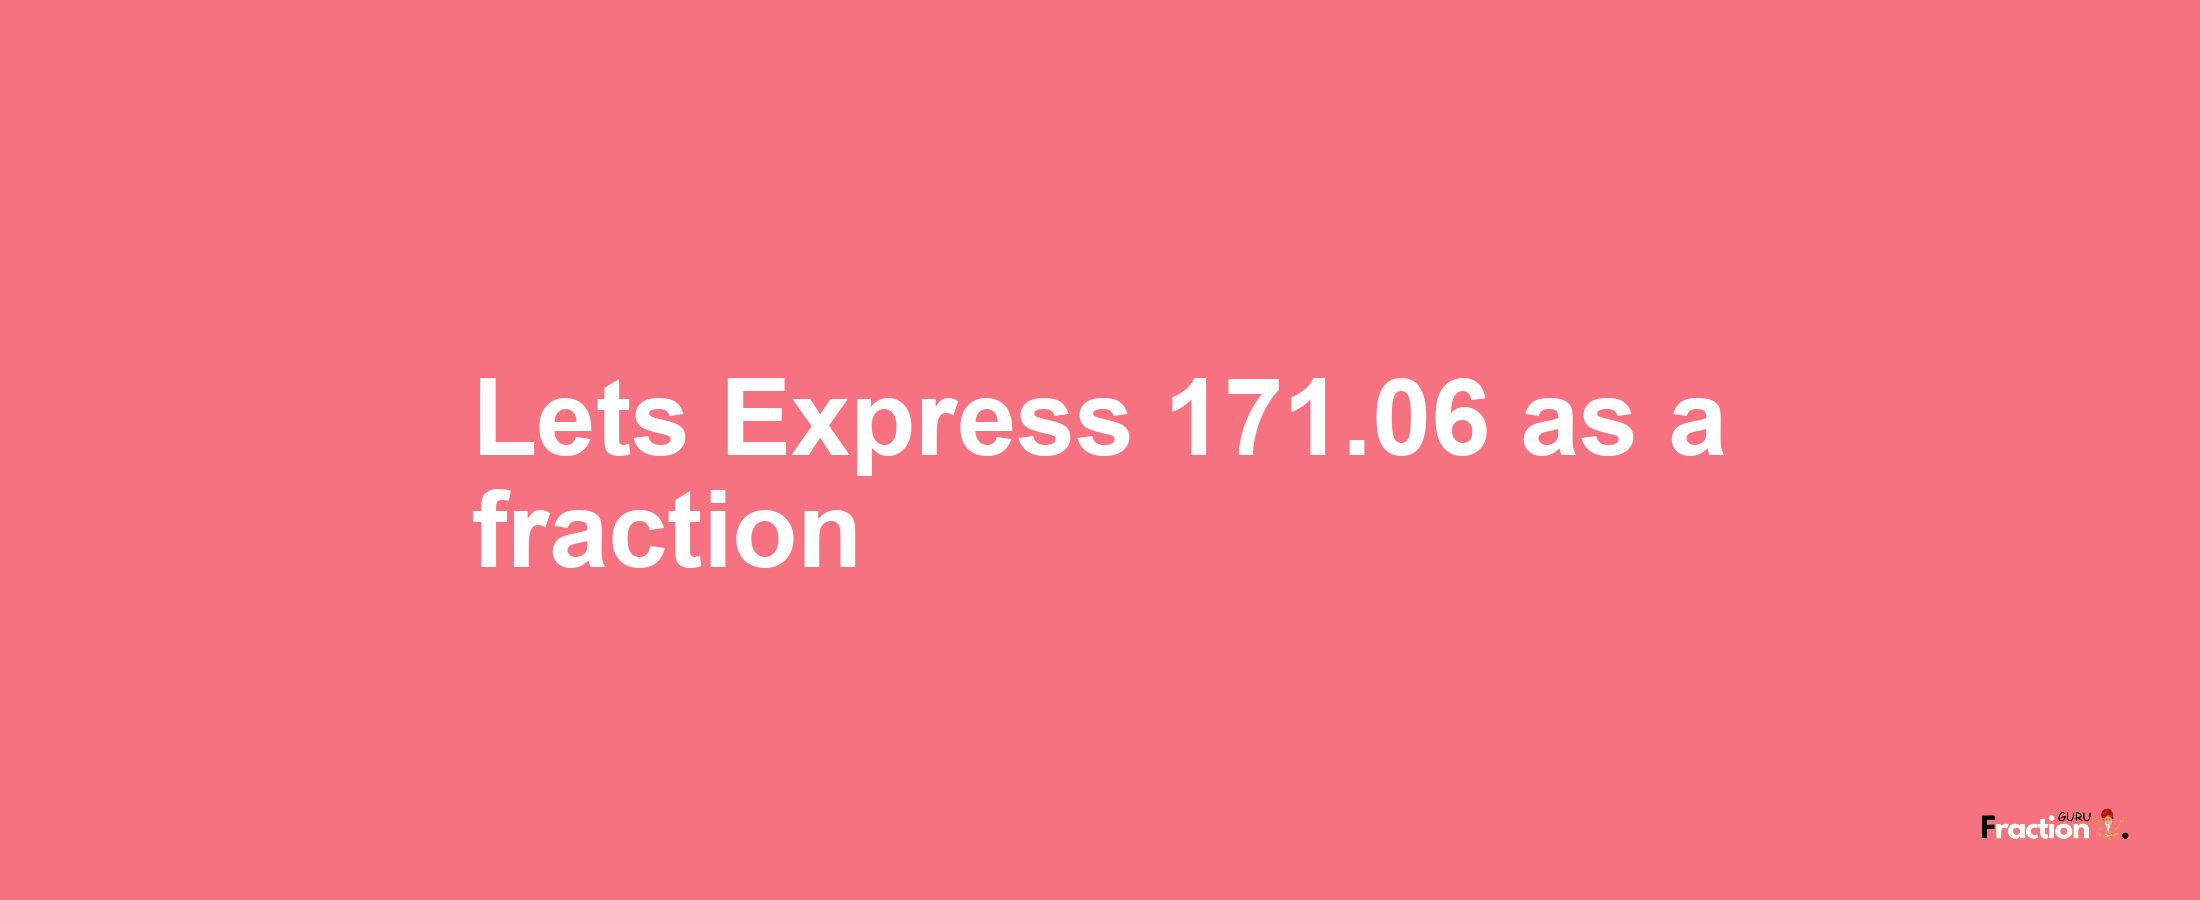 Lets Express 171.06 as afraction